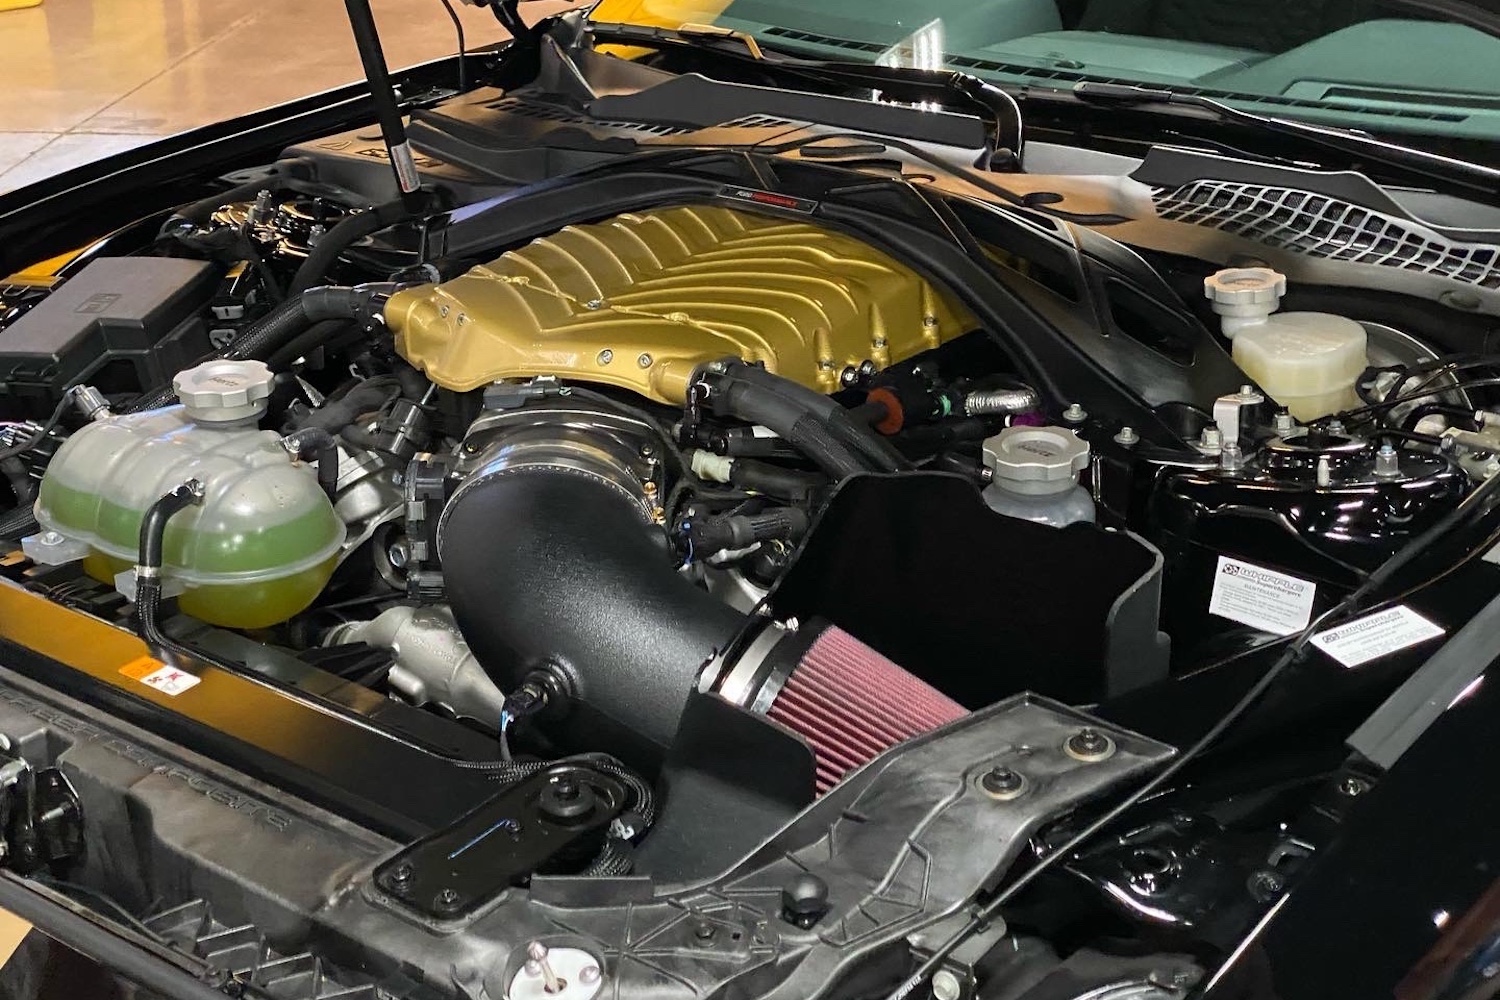 2022 Shelby GT500-H engine bay close up on gold supercharger sitting on top of V8 engine.